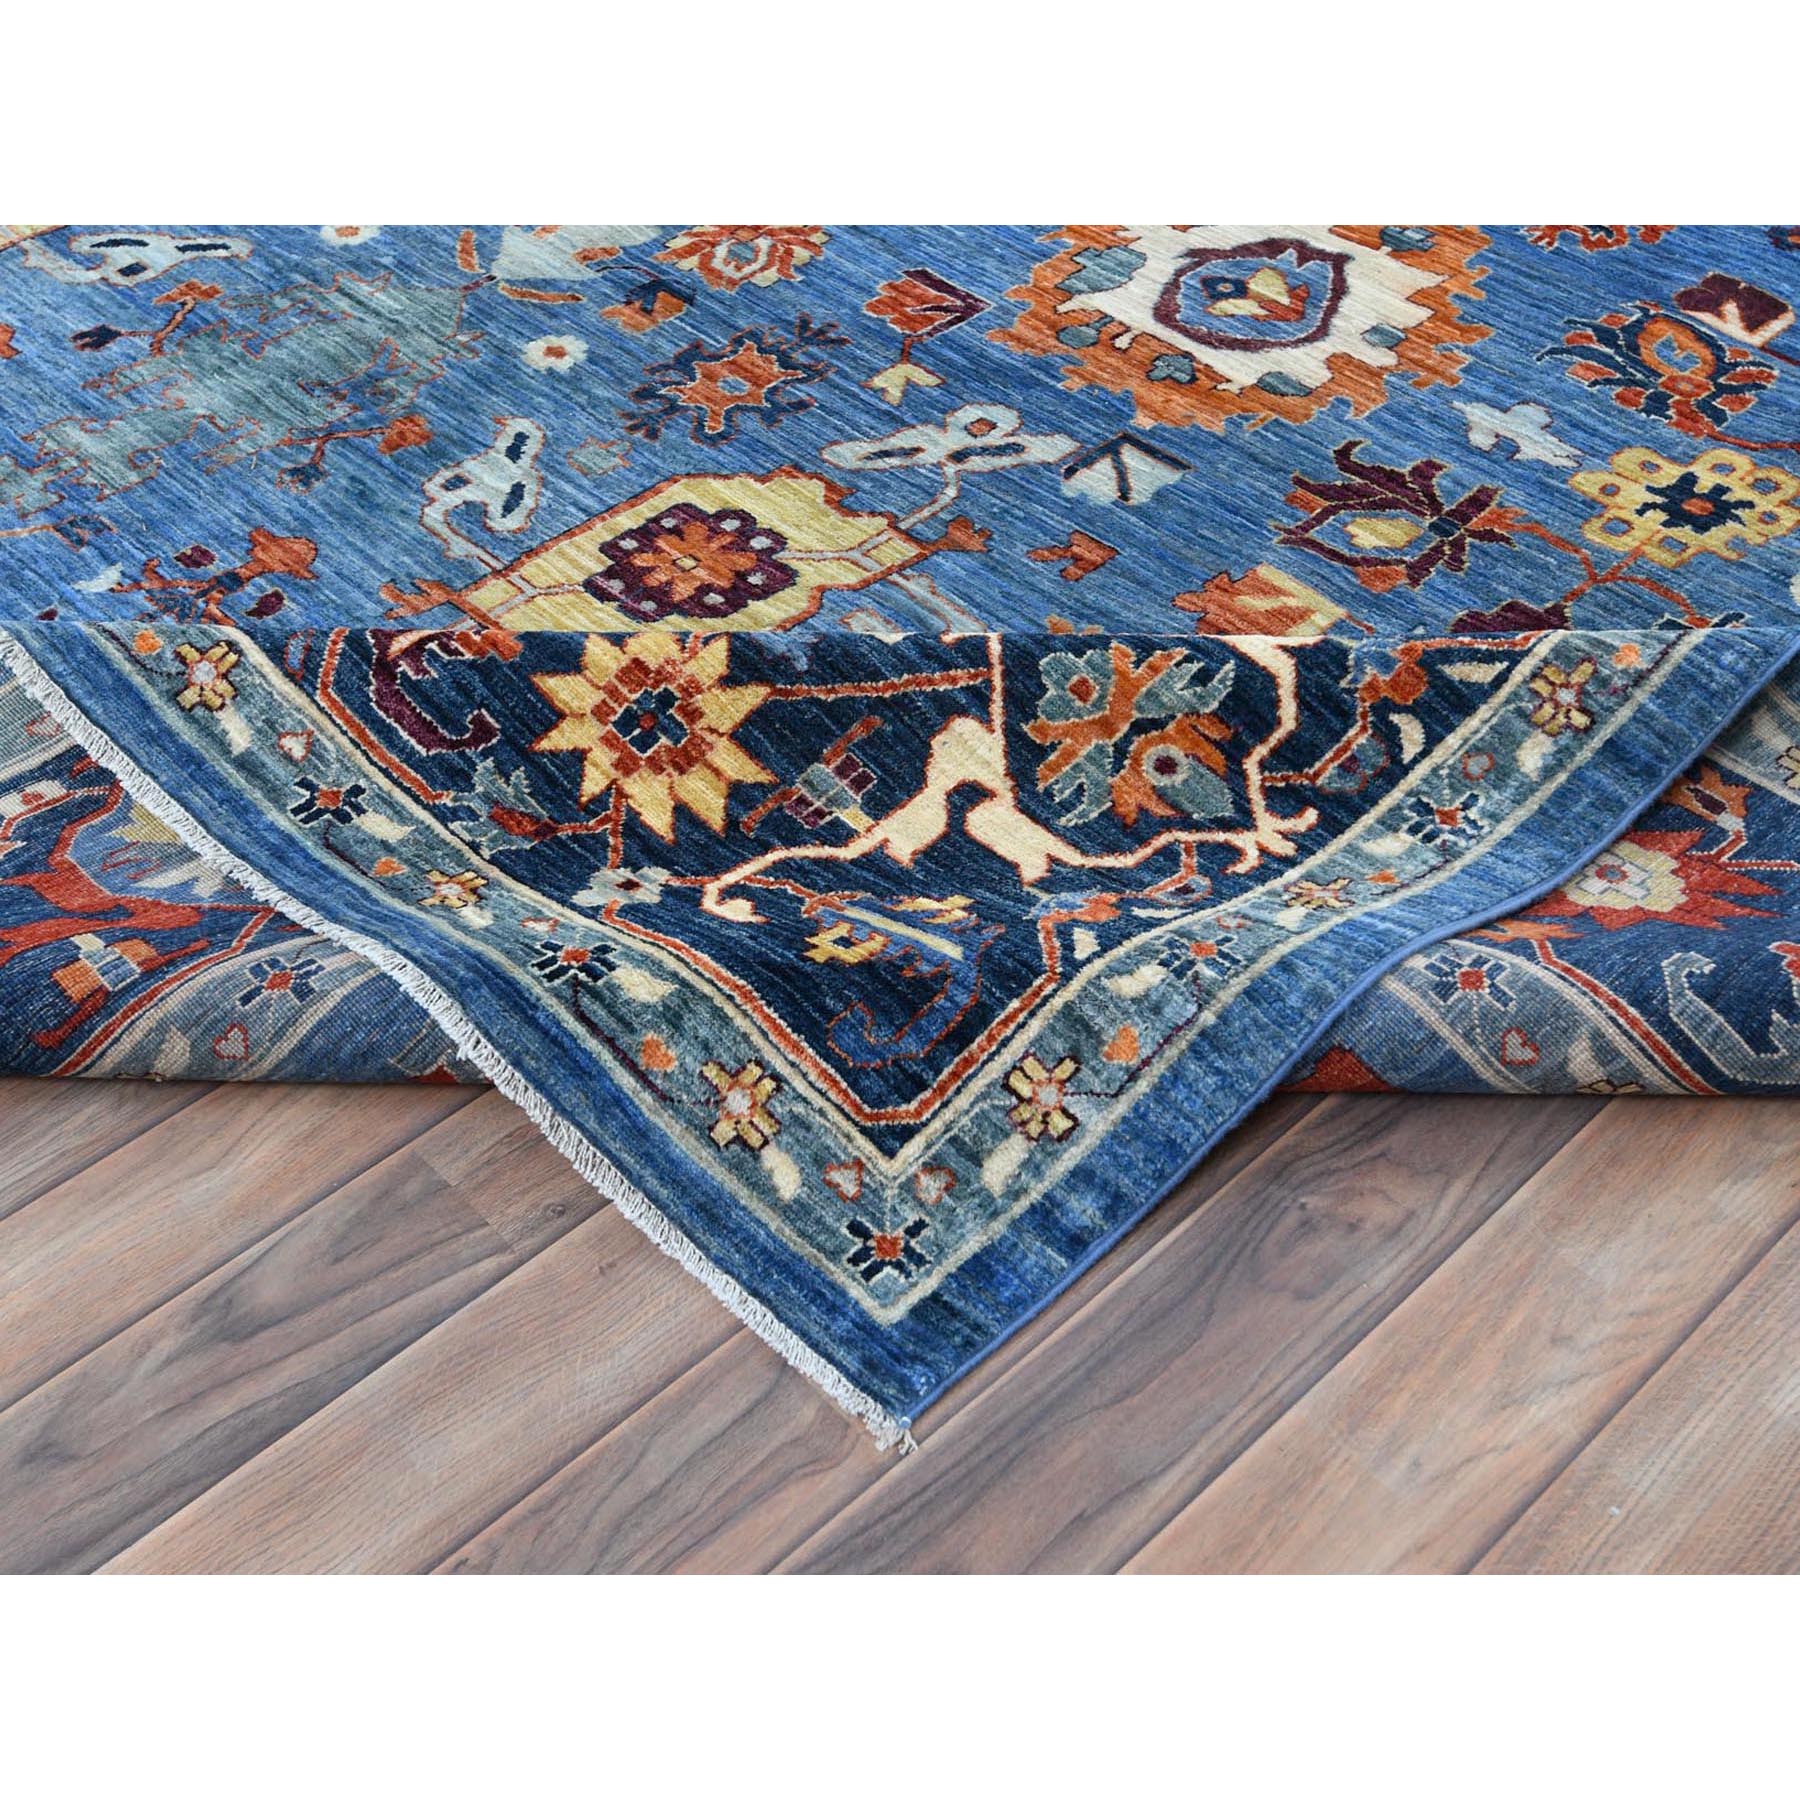 9'2"x11'9" Sapphire Blue, Armenian Inspired Caucasian Design 200 KPSI, Natural Dyes Densely Woven, Pure Wool Hand Woven, Oriental Rug 